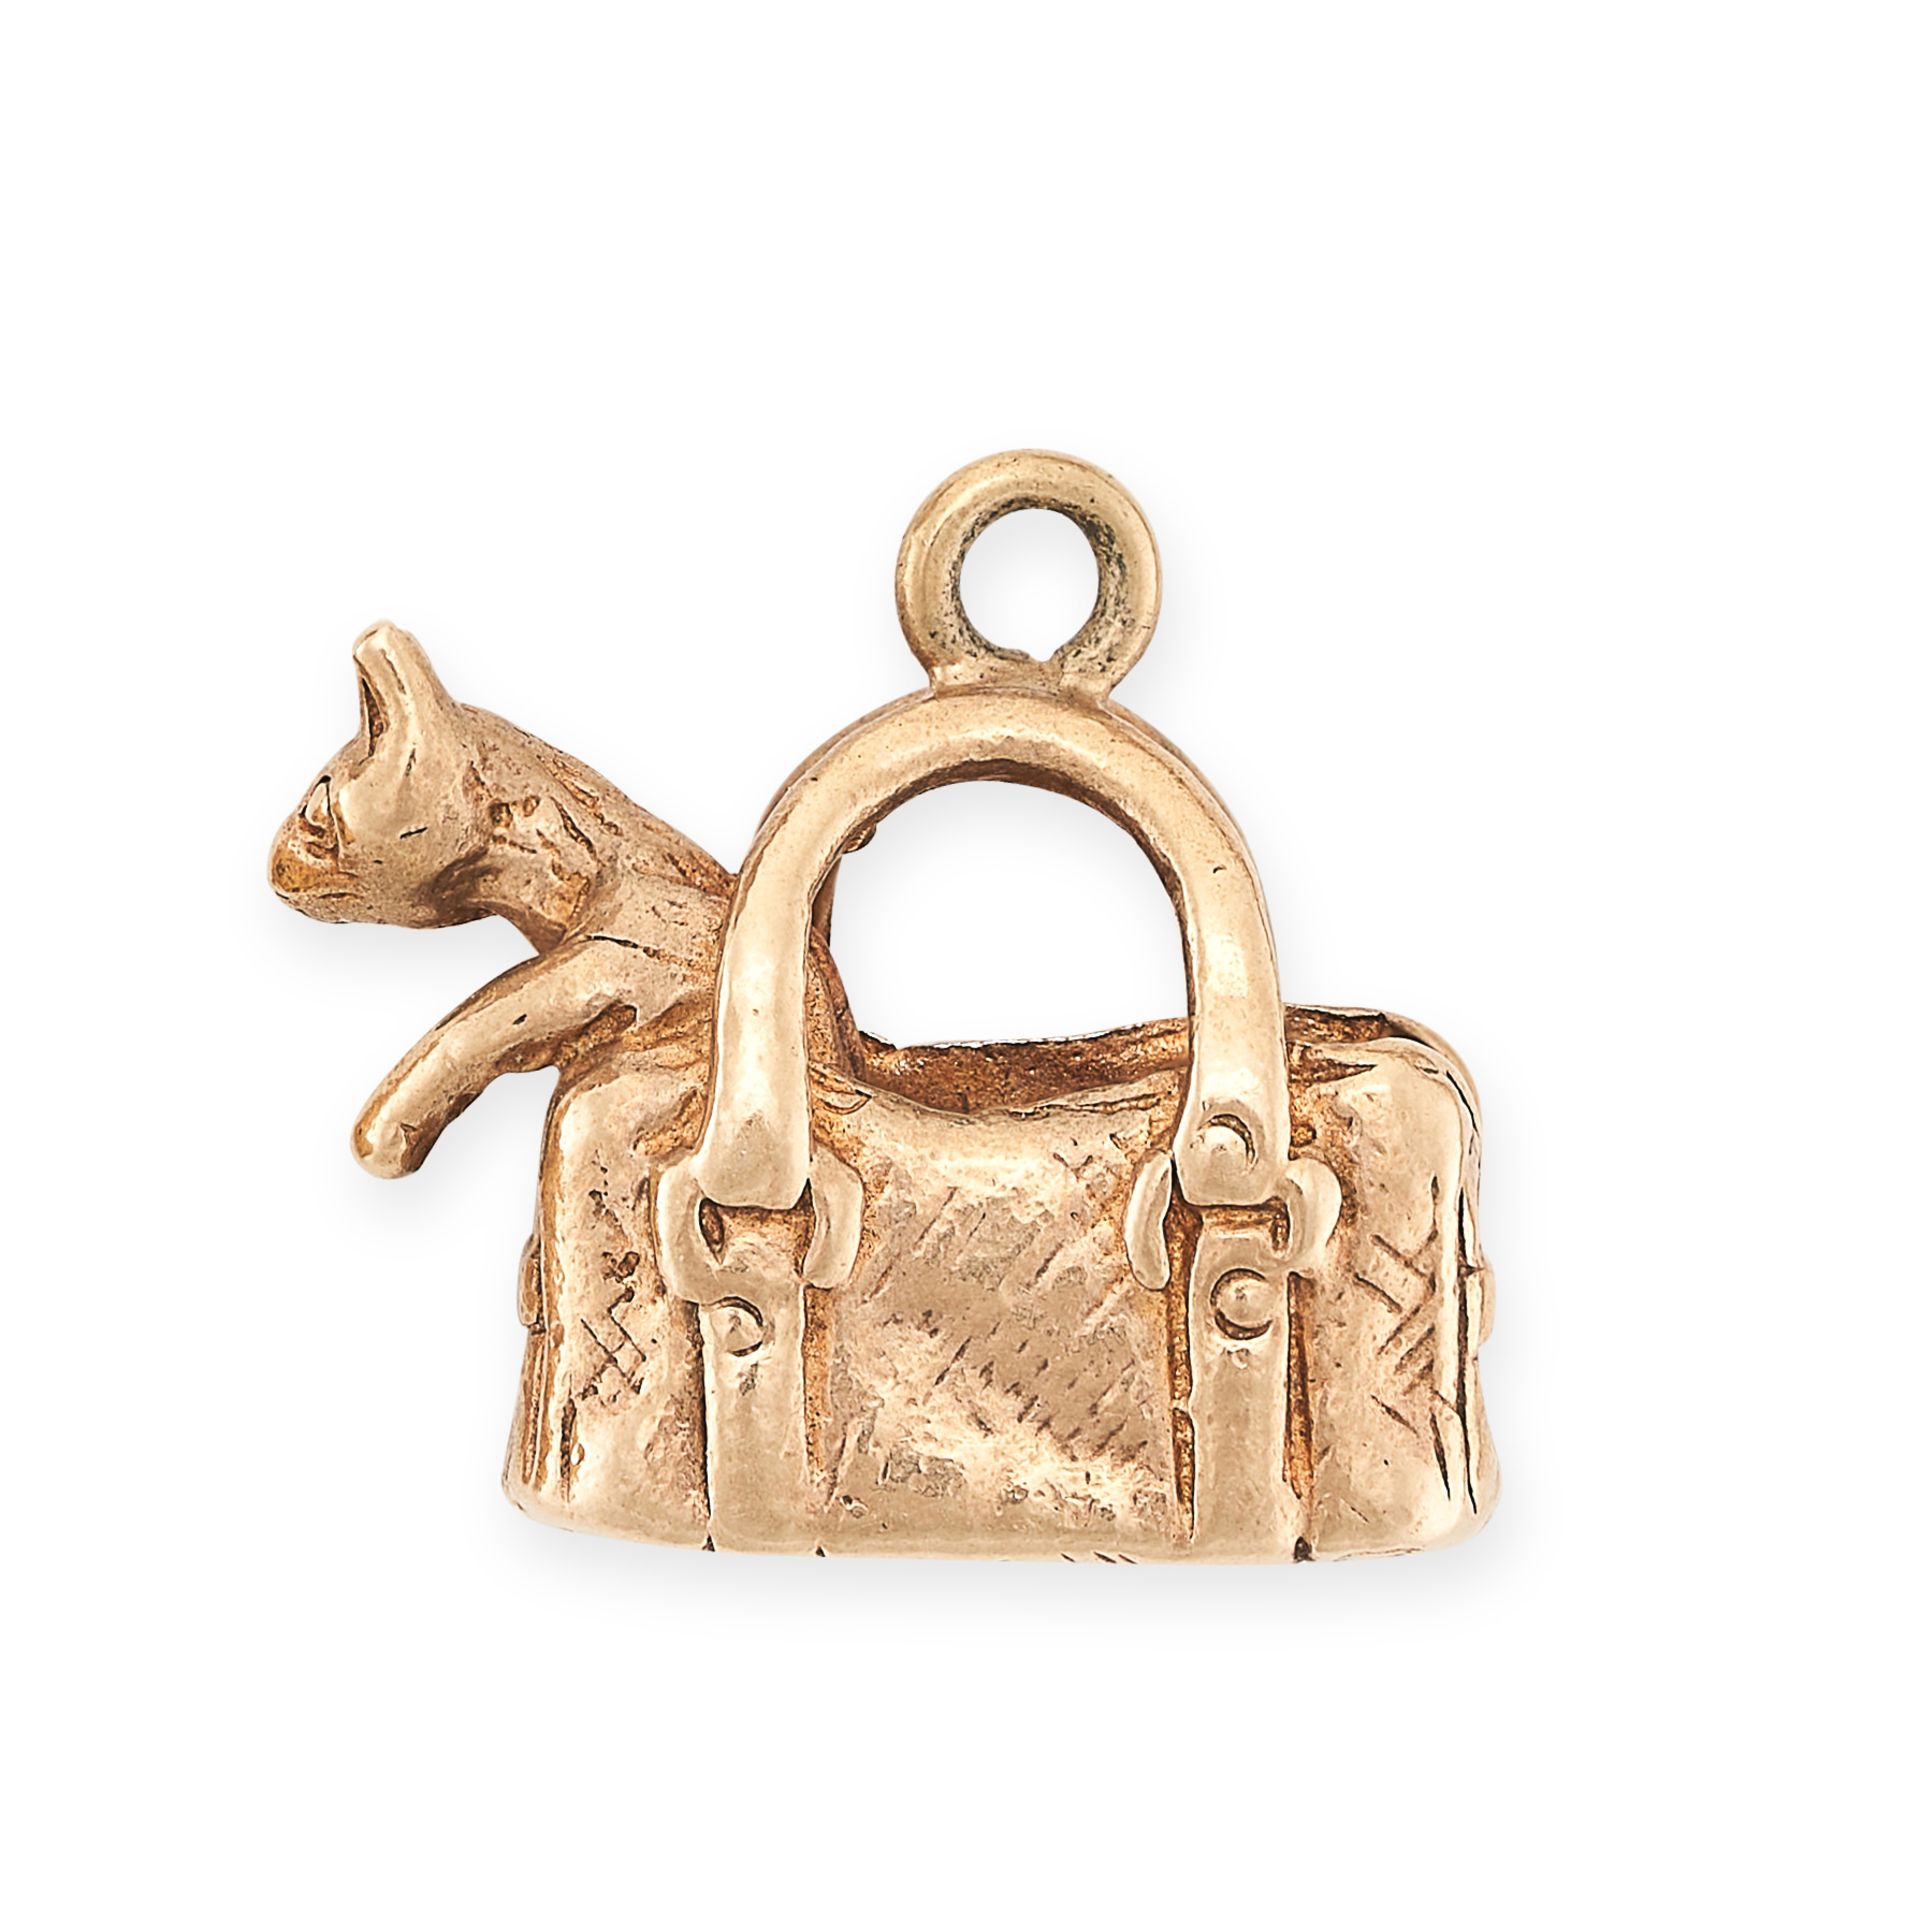 A VINTAGE CAT AND HANDBAG CHARM / PENDANT in 9ct yellow gold, designed as a cat poking out of a